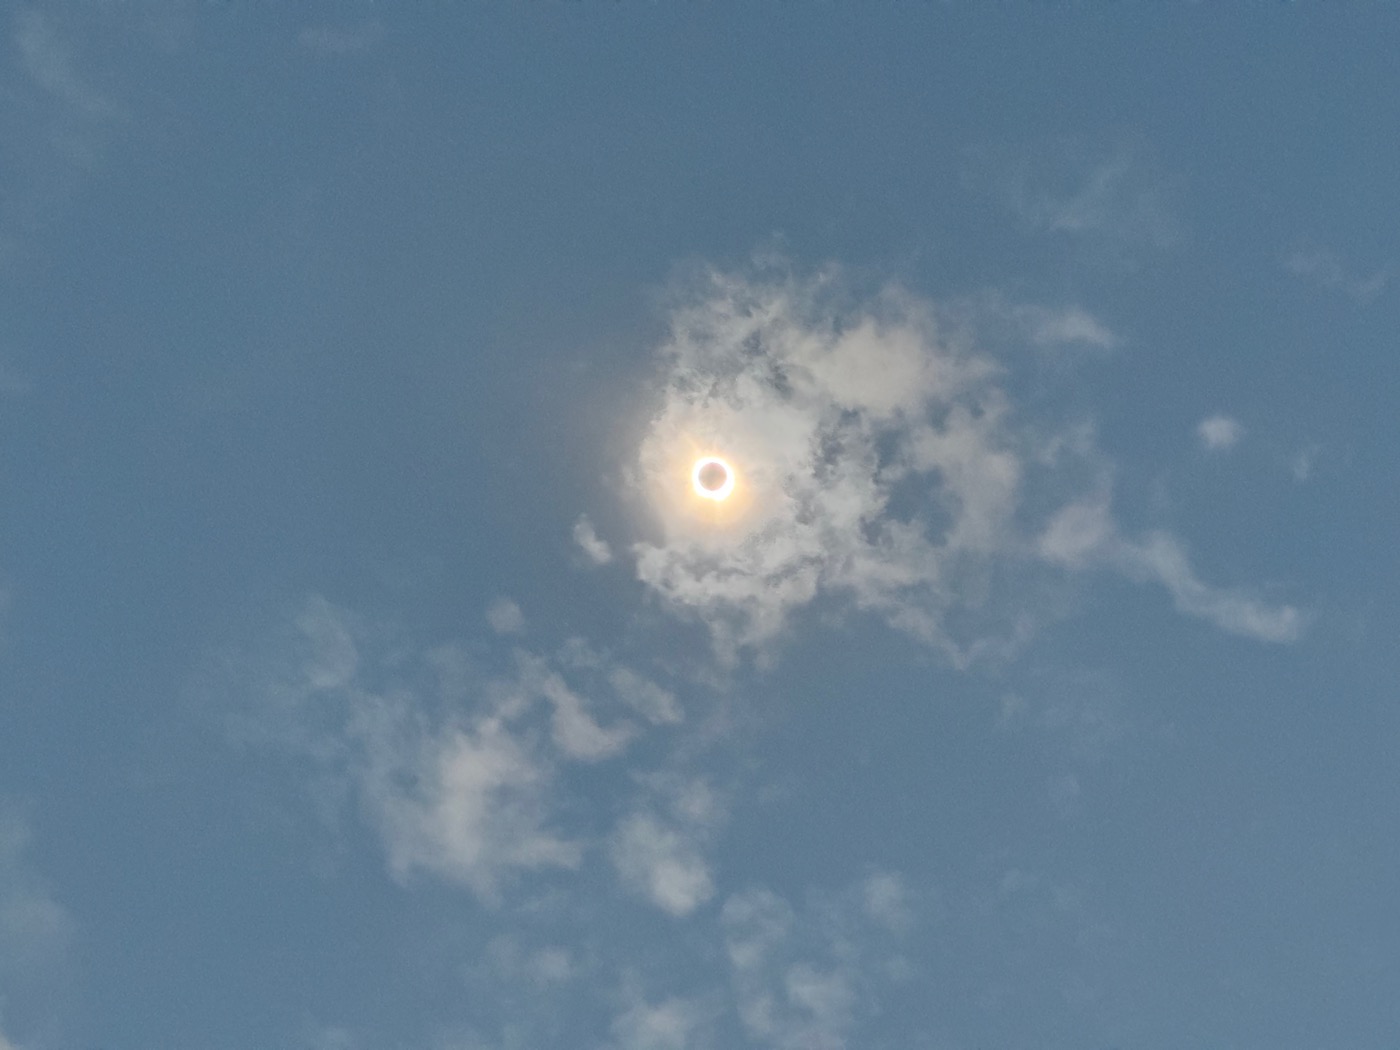 A picture of the total eclipse, behind a wisp of cloud.